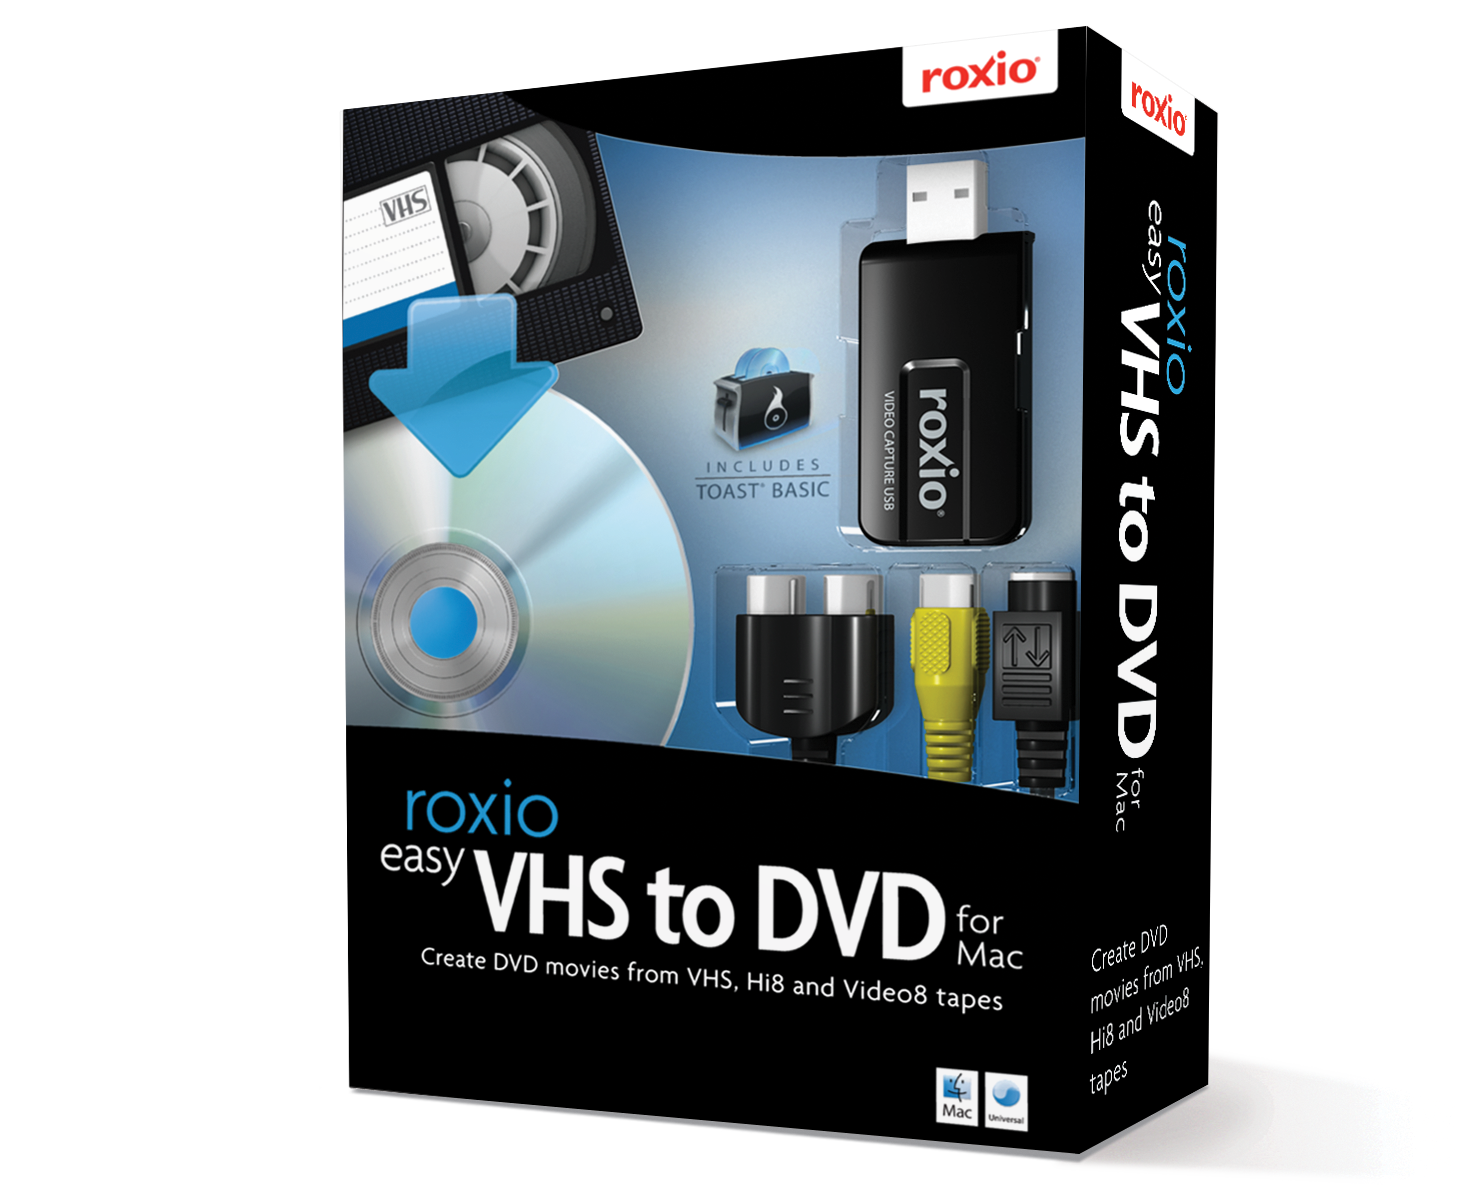 download roxio vhs to dvd mac software